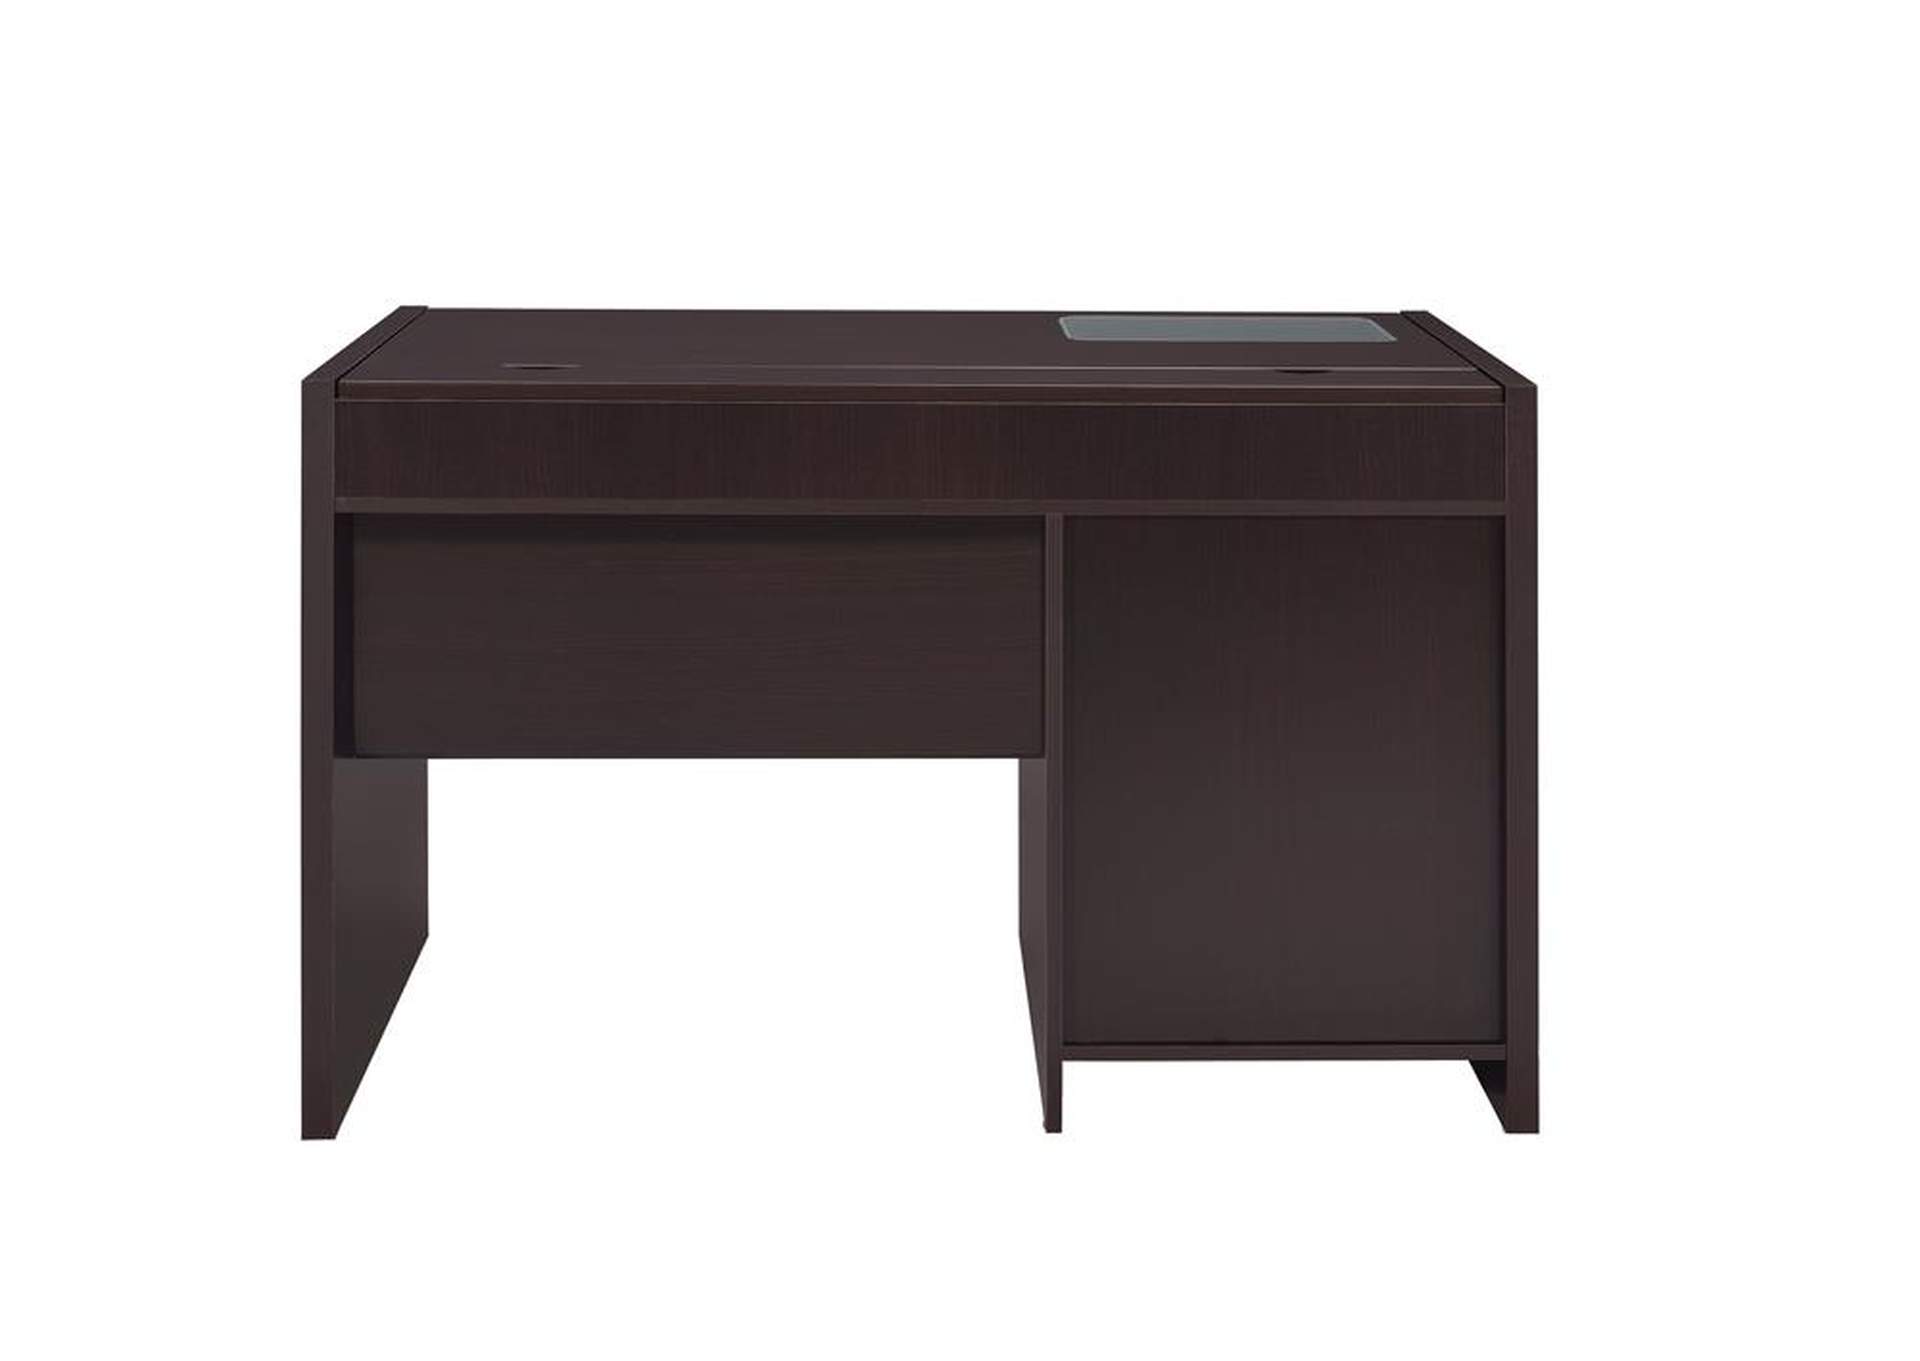 Halston 3-drawer Rectangular Connect-it Office Desk Cappuccino,Coaster Furniture